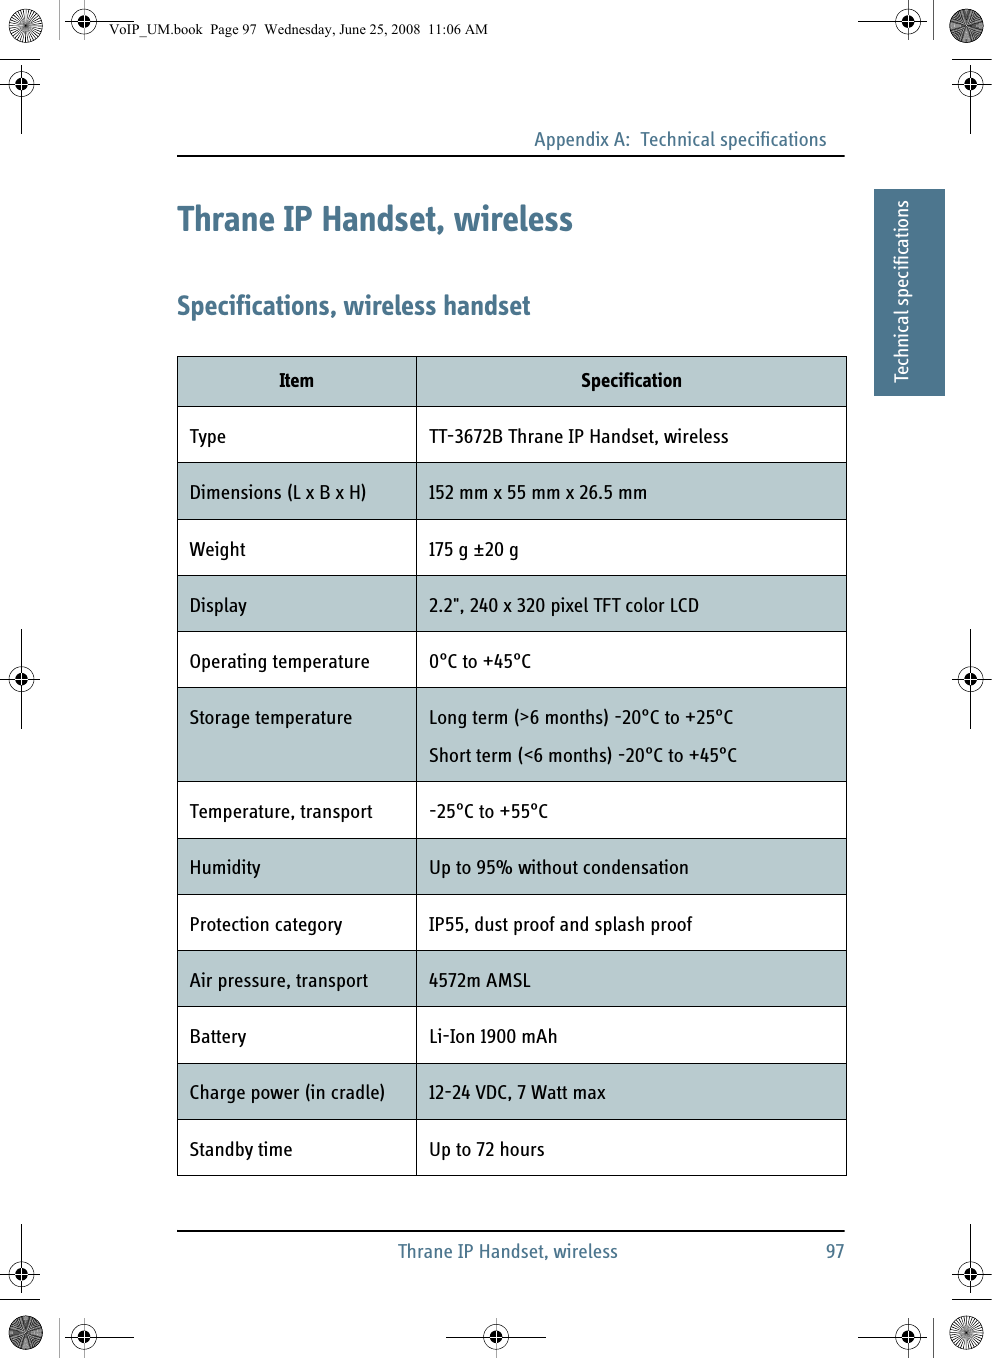 Appendix A:  Technical specificationsThrane IP Handset, wireless 97AAAAATechnical specificationsThrane IP Handset, wirelessSpecifications, wireless handsetItem SpecificationType TT-3672B Thrane IP Handset, wirelessDimensions (L x B x H) 152 mm x 55 mm x 26.5 mmWeight 175 g ±20 gDisplay 2.2&quot;, 240 x 320 pixel TFT color LCDOperating temperature 0°C to +45°CStorage temperature Long term (&gt;6 months) -20°C to +25°CShort term (&lt;6 months) -20°C to +45°CTemperature, transport -25°C to +55°CHumidity Up to 95% without condensationProtection category IP55, dust proof and splash proofAir pressure, transport 4572m AMSLBattery Li-Ion 1900 mAhCharge power (in cradle) 12-24 VDC, 7 Watt max Standby time Up to 72 hoursVoIP_UM.book  Page 97  Wednesday, June 25, 2008  11:06 AM